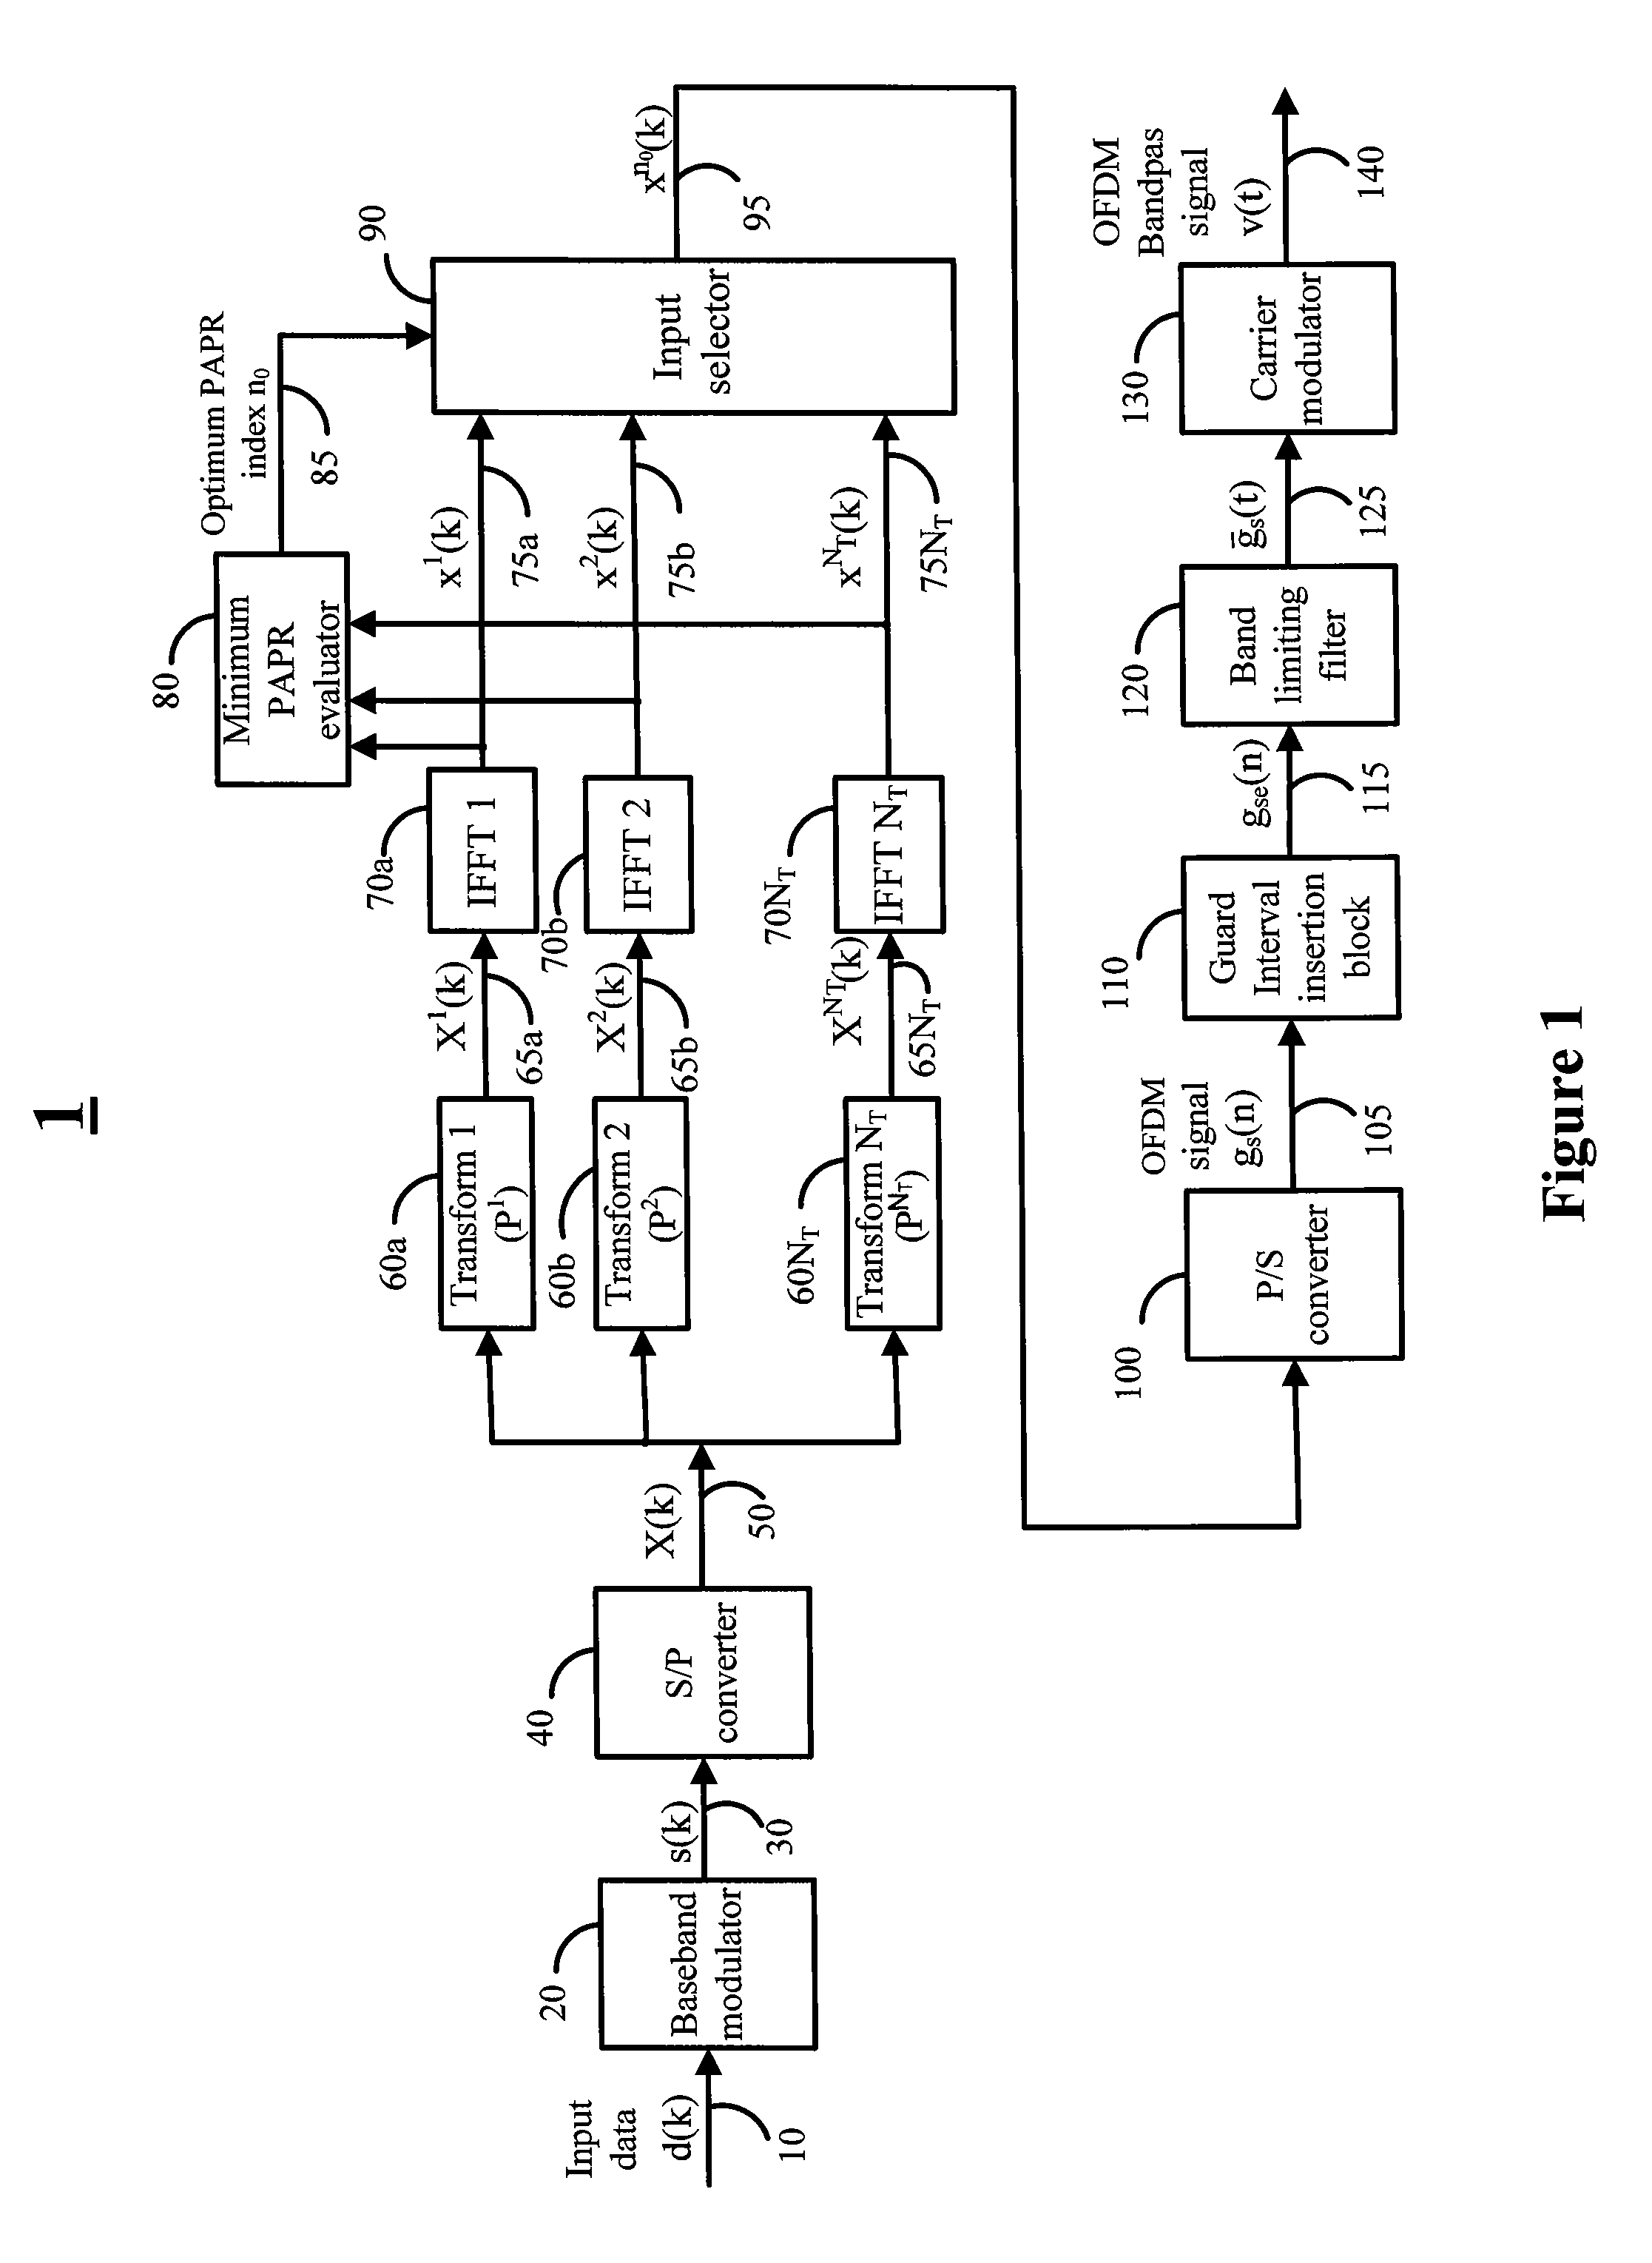 Multi transform OFDM systems and methods with low peak to average power ratio signals